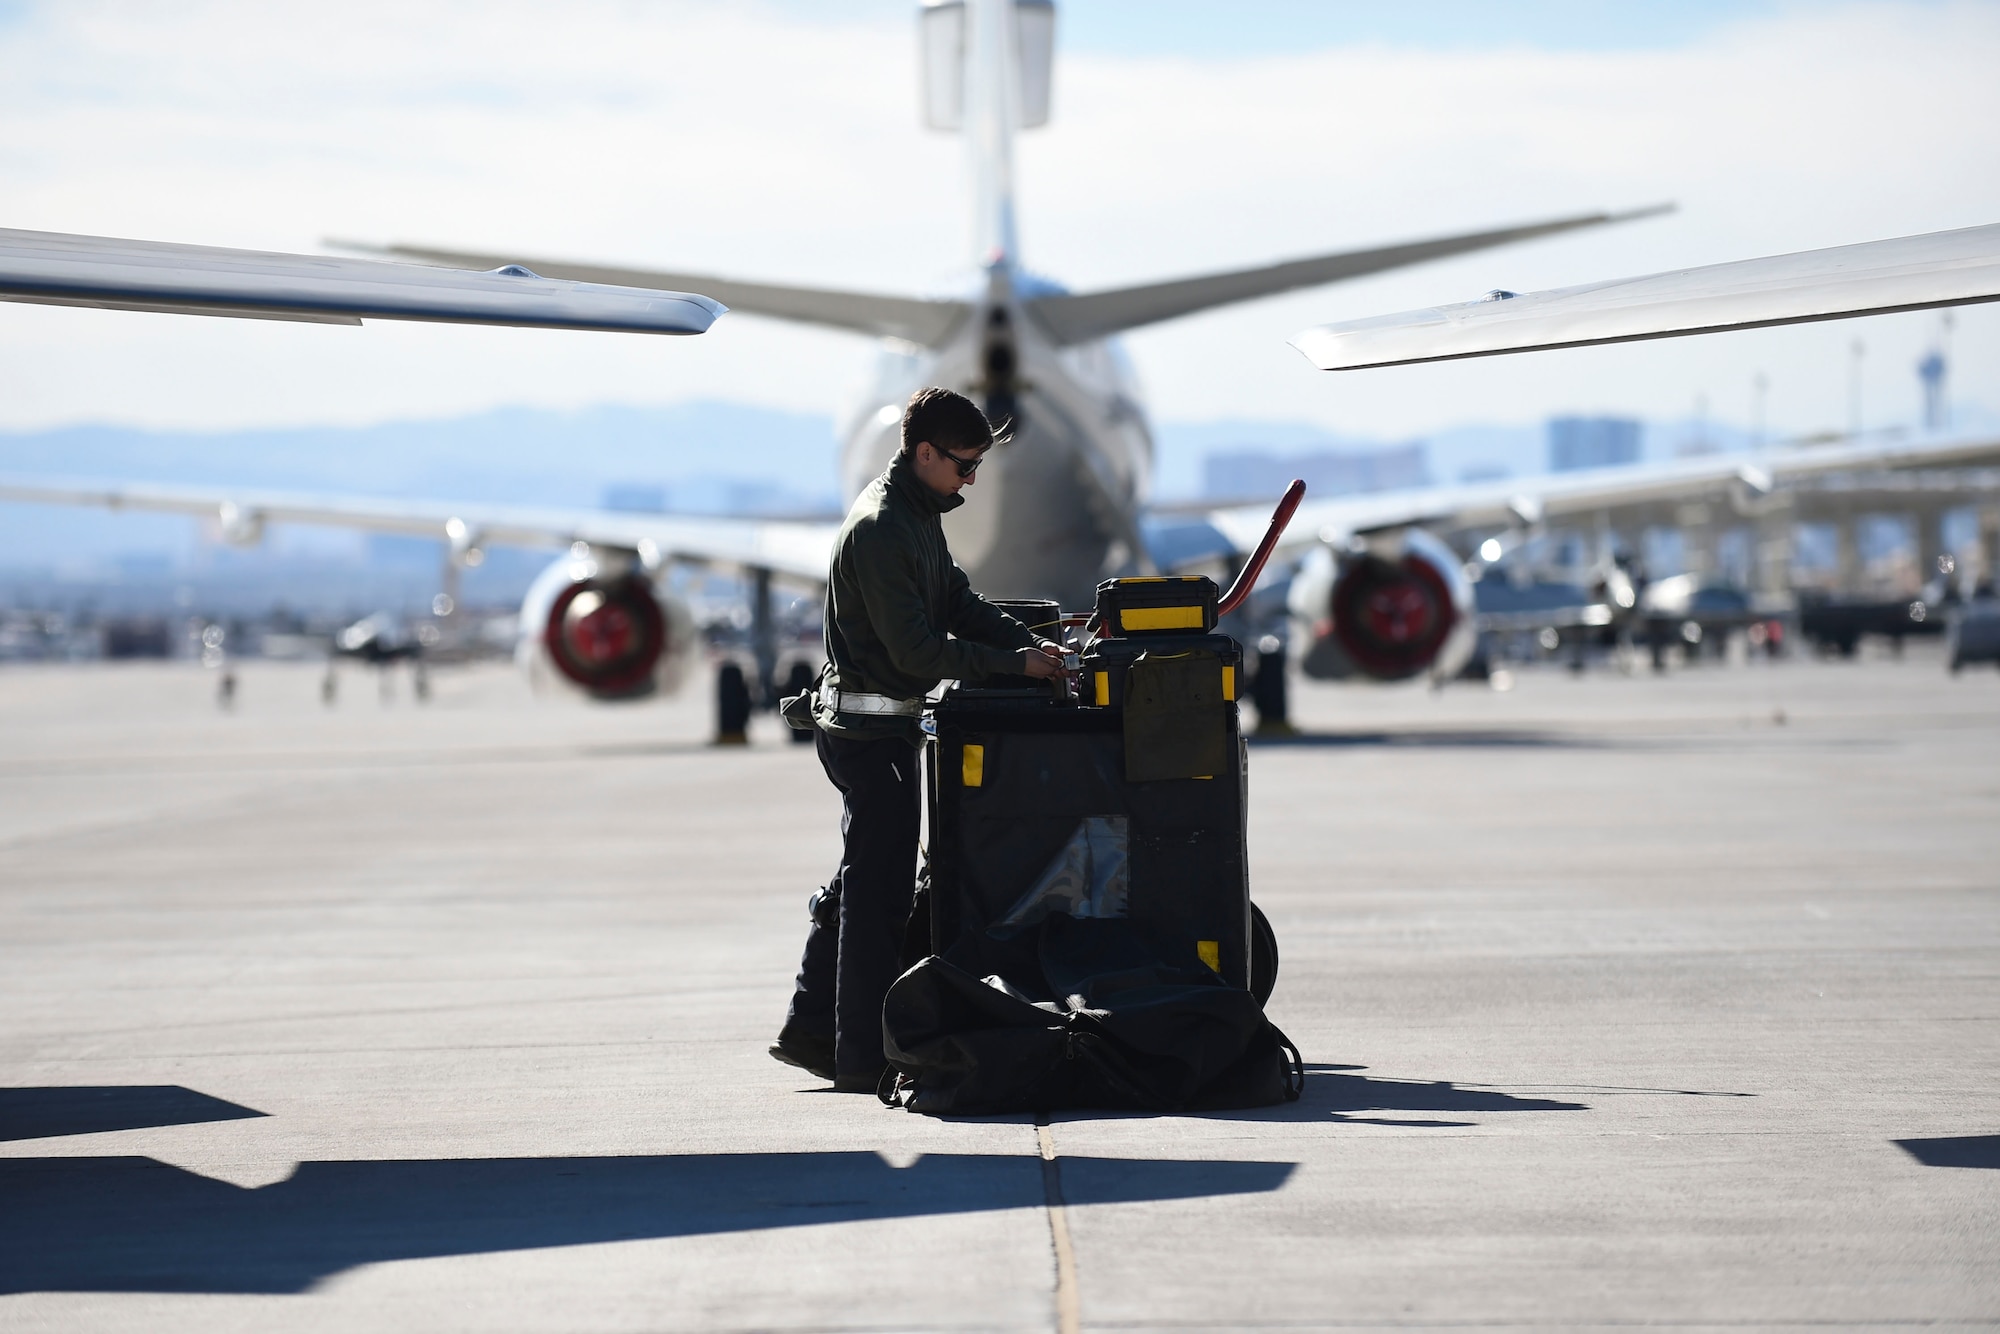 U.S. Air Force Airman 1st Class Brian Dowling, 27th Aircraft Maintenance Unit crew chief, checks his equipment before conducting preflight inspections on an F-22 Raptor during Red Flag 17-1 at Nellis Air Force Base, Nev., Jan. 26, 2017. Red Flag 17-1 includes not only Raptor aircrews and support, but fellow fifth generation F-35A Lightning II crews. (U.S. Air Force photo by Staff Sgt. Natasha Stannard)